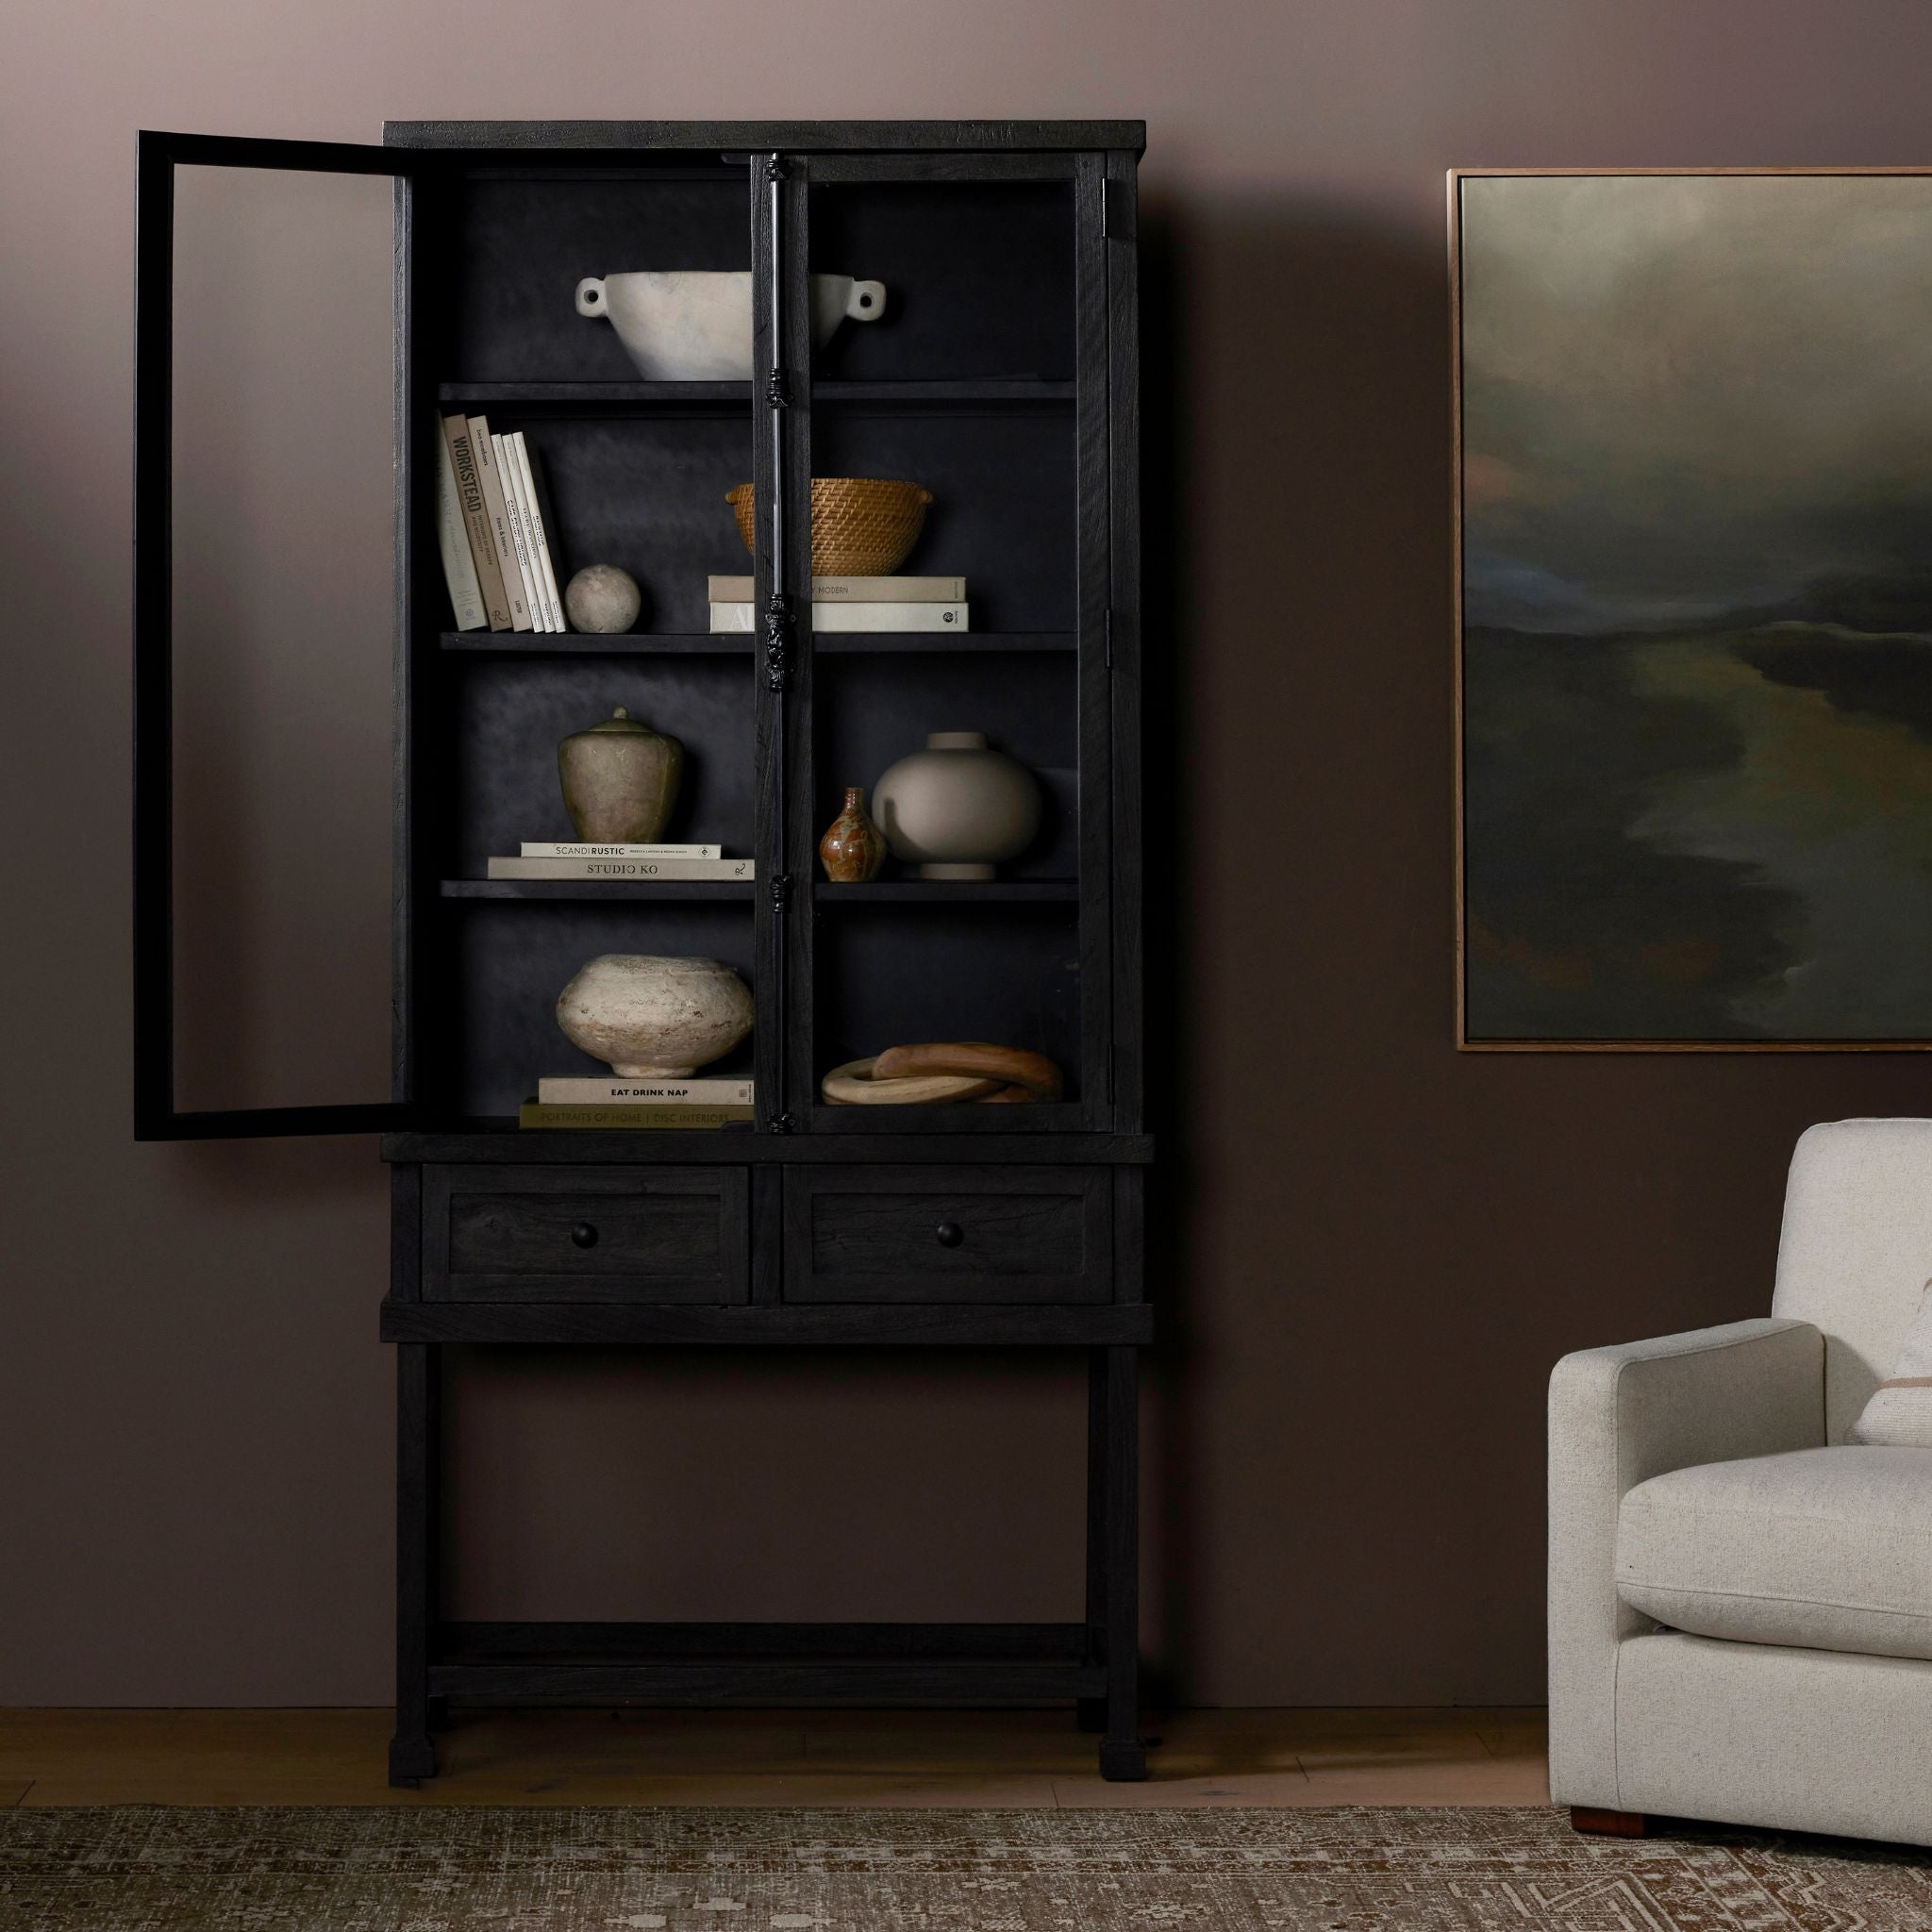 Simply Elevated - Solid reclaimed woods are finished in a deep coal-black, with crémone hardware for a classic touch. Tempered glass doors plus dual drawers for bonus storage.